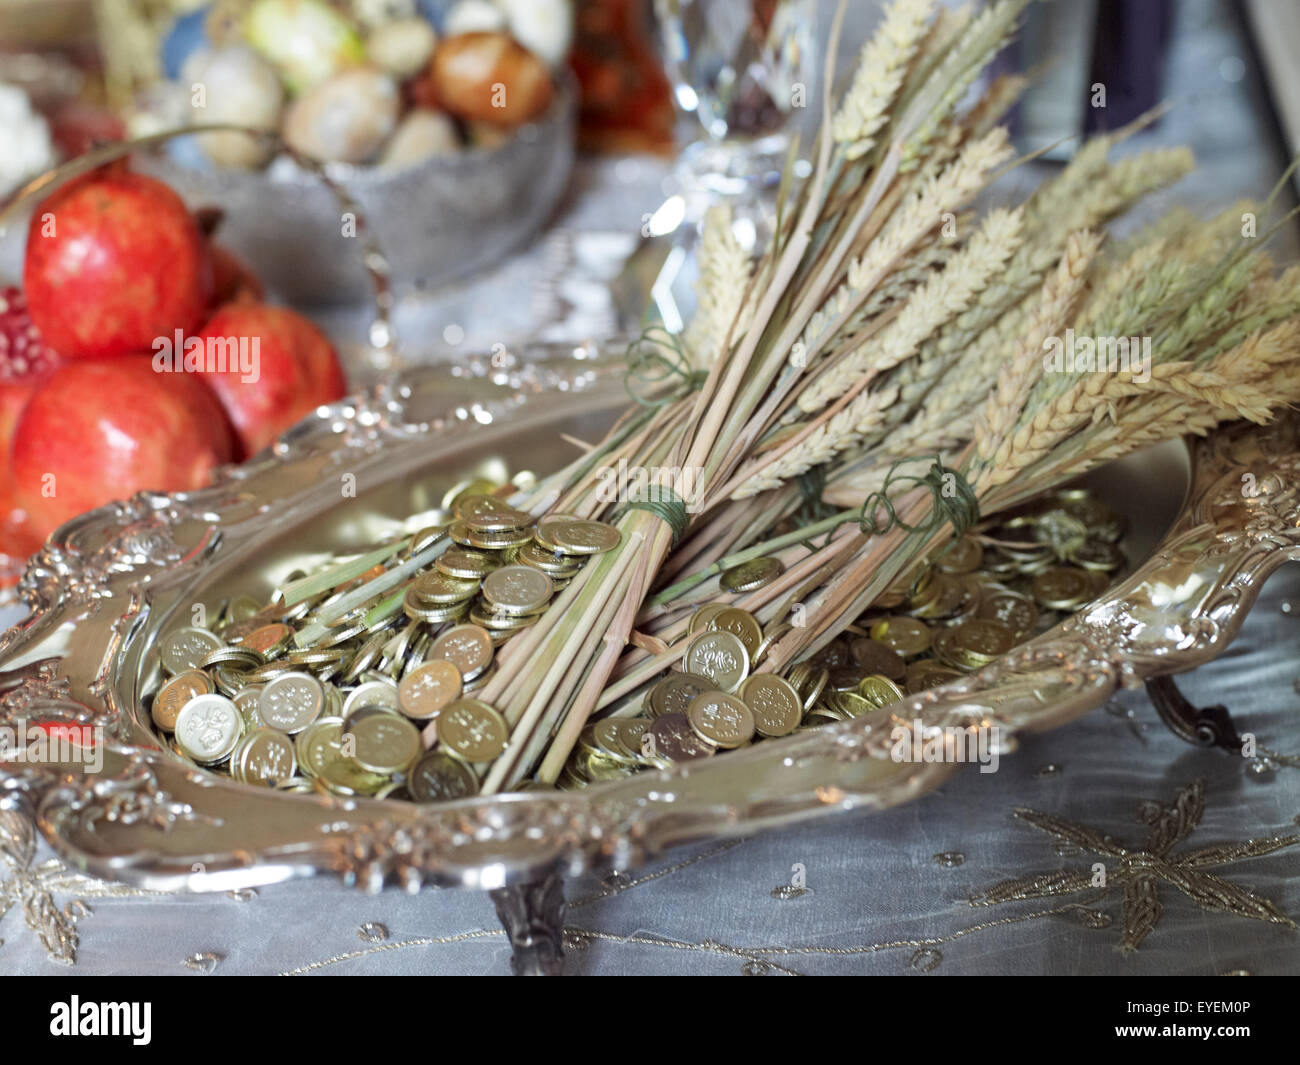 Persian celebration of gold wheat and coins Stock Photo